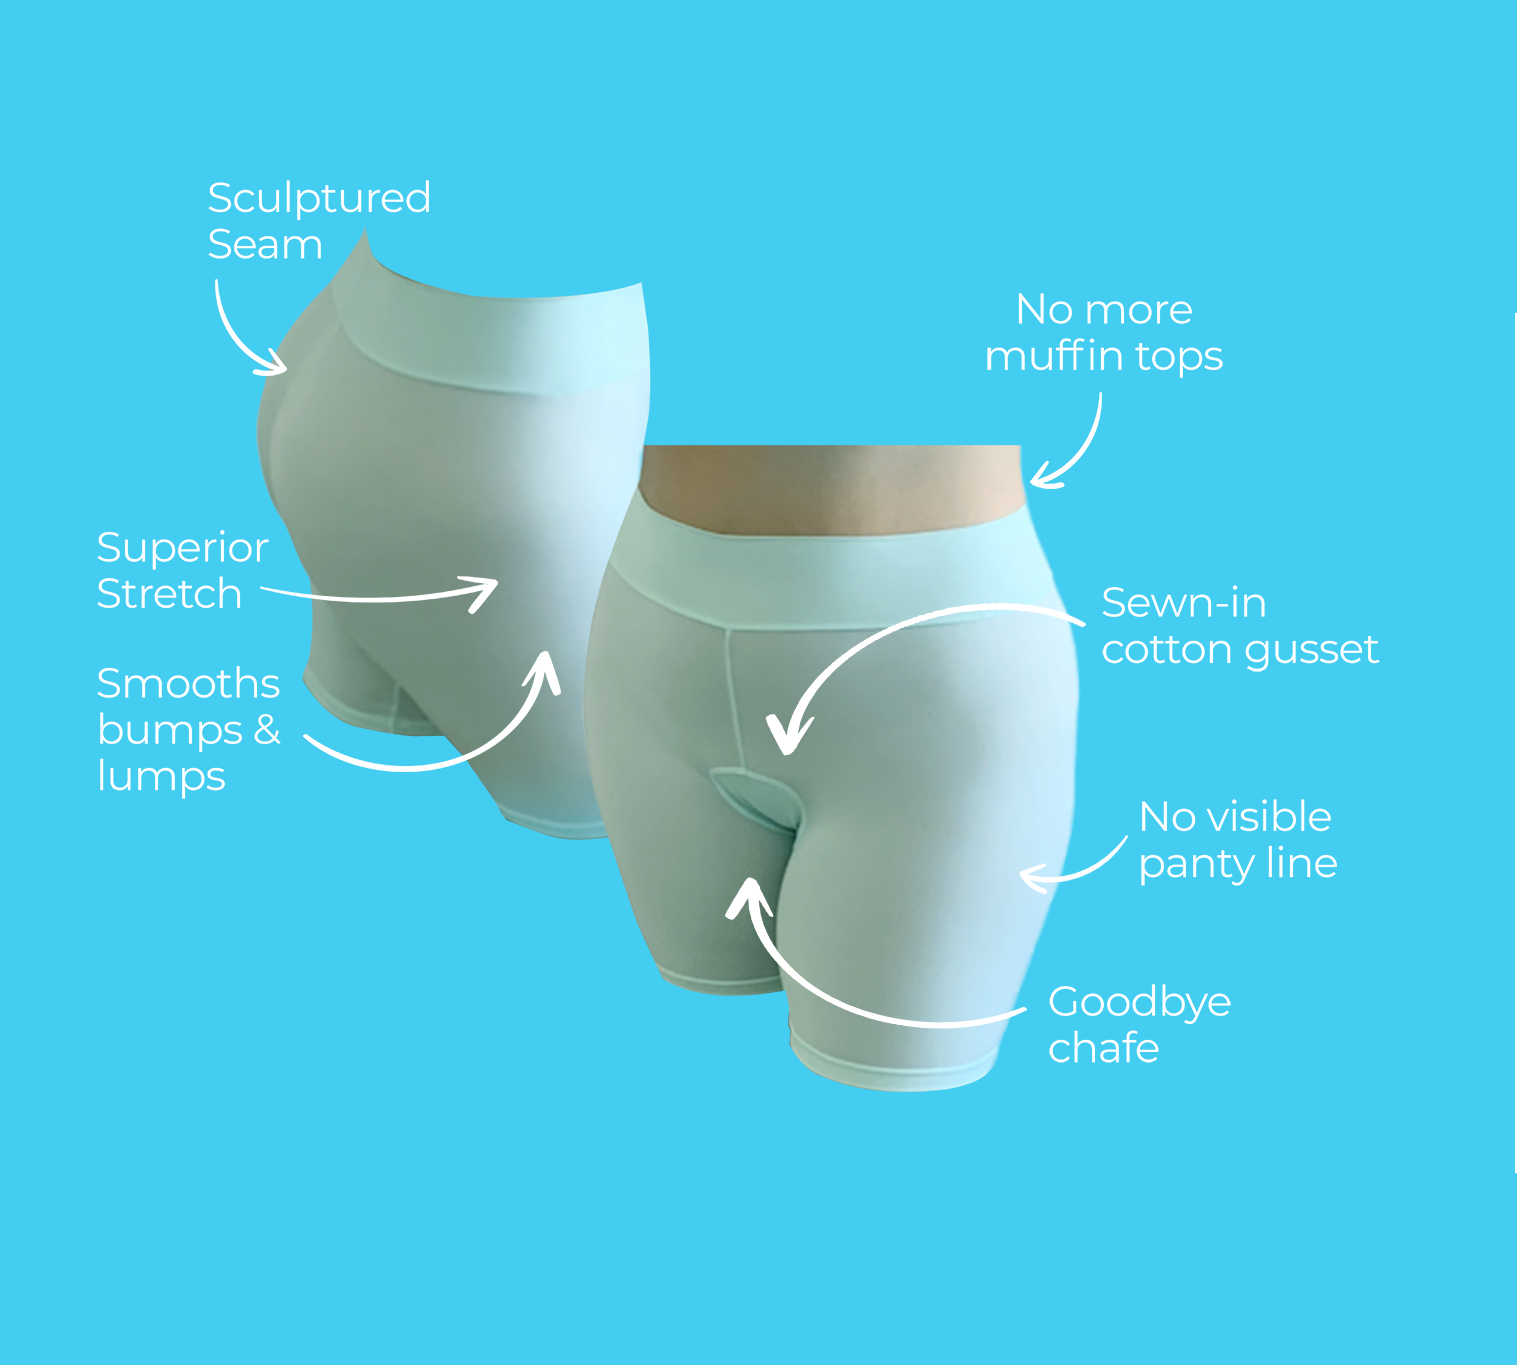 Diagram Showing the benefits of Skanties: No more muffin tops points to waistband with smooth lines, Sewn-in cotton gusset pointing to the extra large cotton underwear panel , no visible panty line pointing to the smooth lines on the side of the thigh, Goodbye chafe pointing to the thigh area where the silk fabric prevents chafing Sculptered seam pointing to centre back seam, Superior stretch and Smooths bumps and lumps pointing to the side of the leg